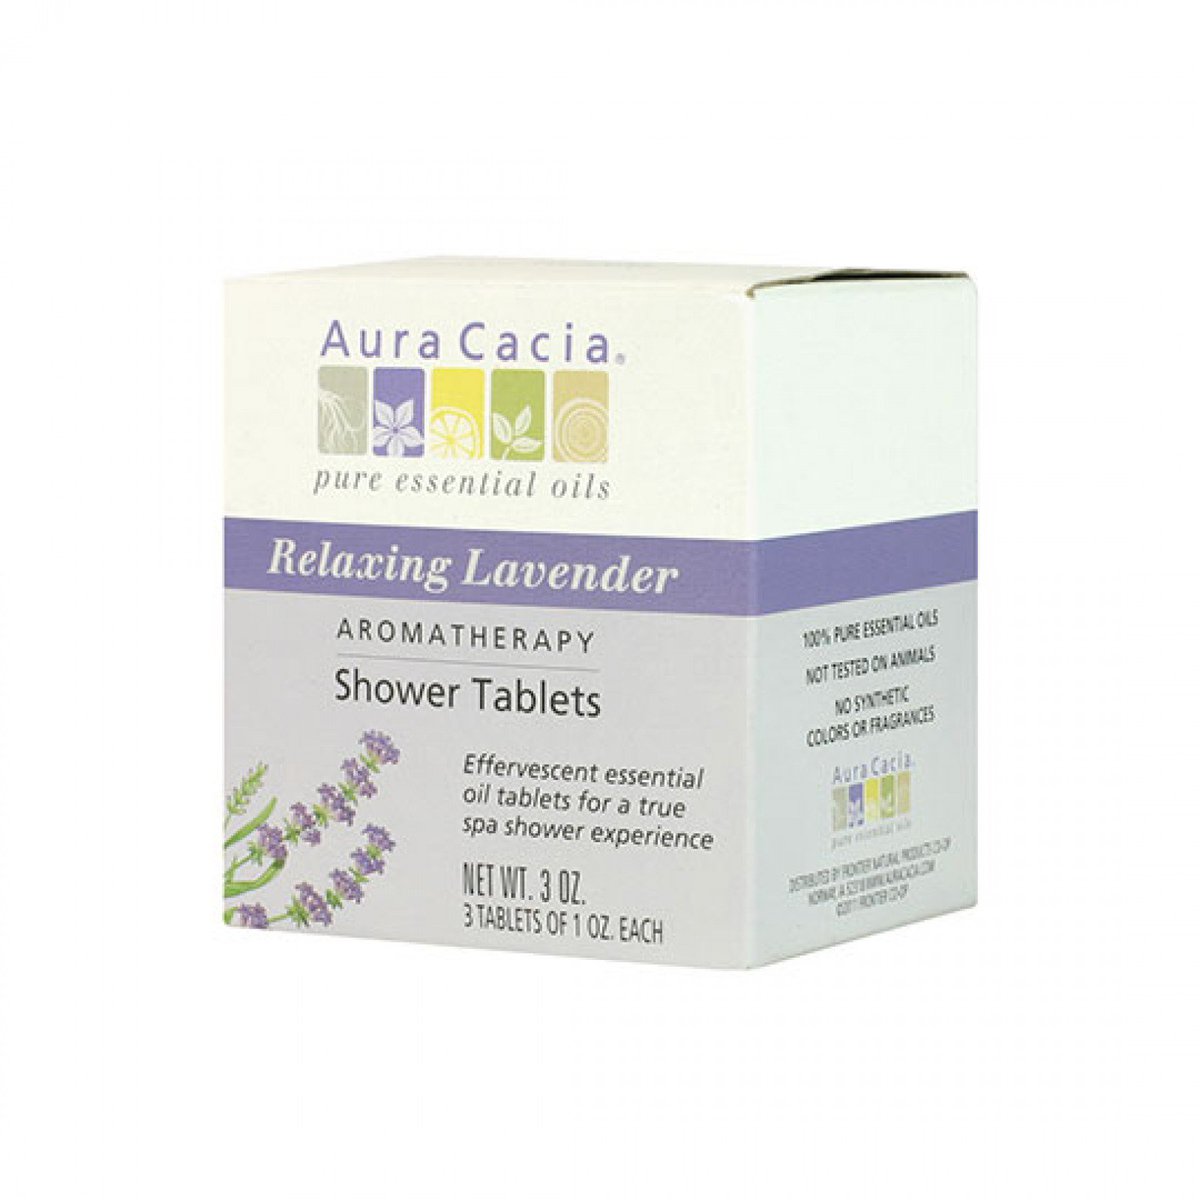 Primary image of Relaxing Lavender Shower Tablets (3 Pack)